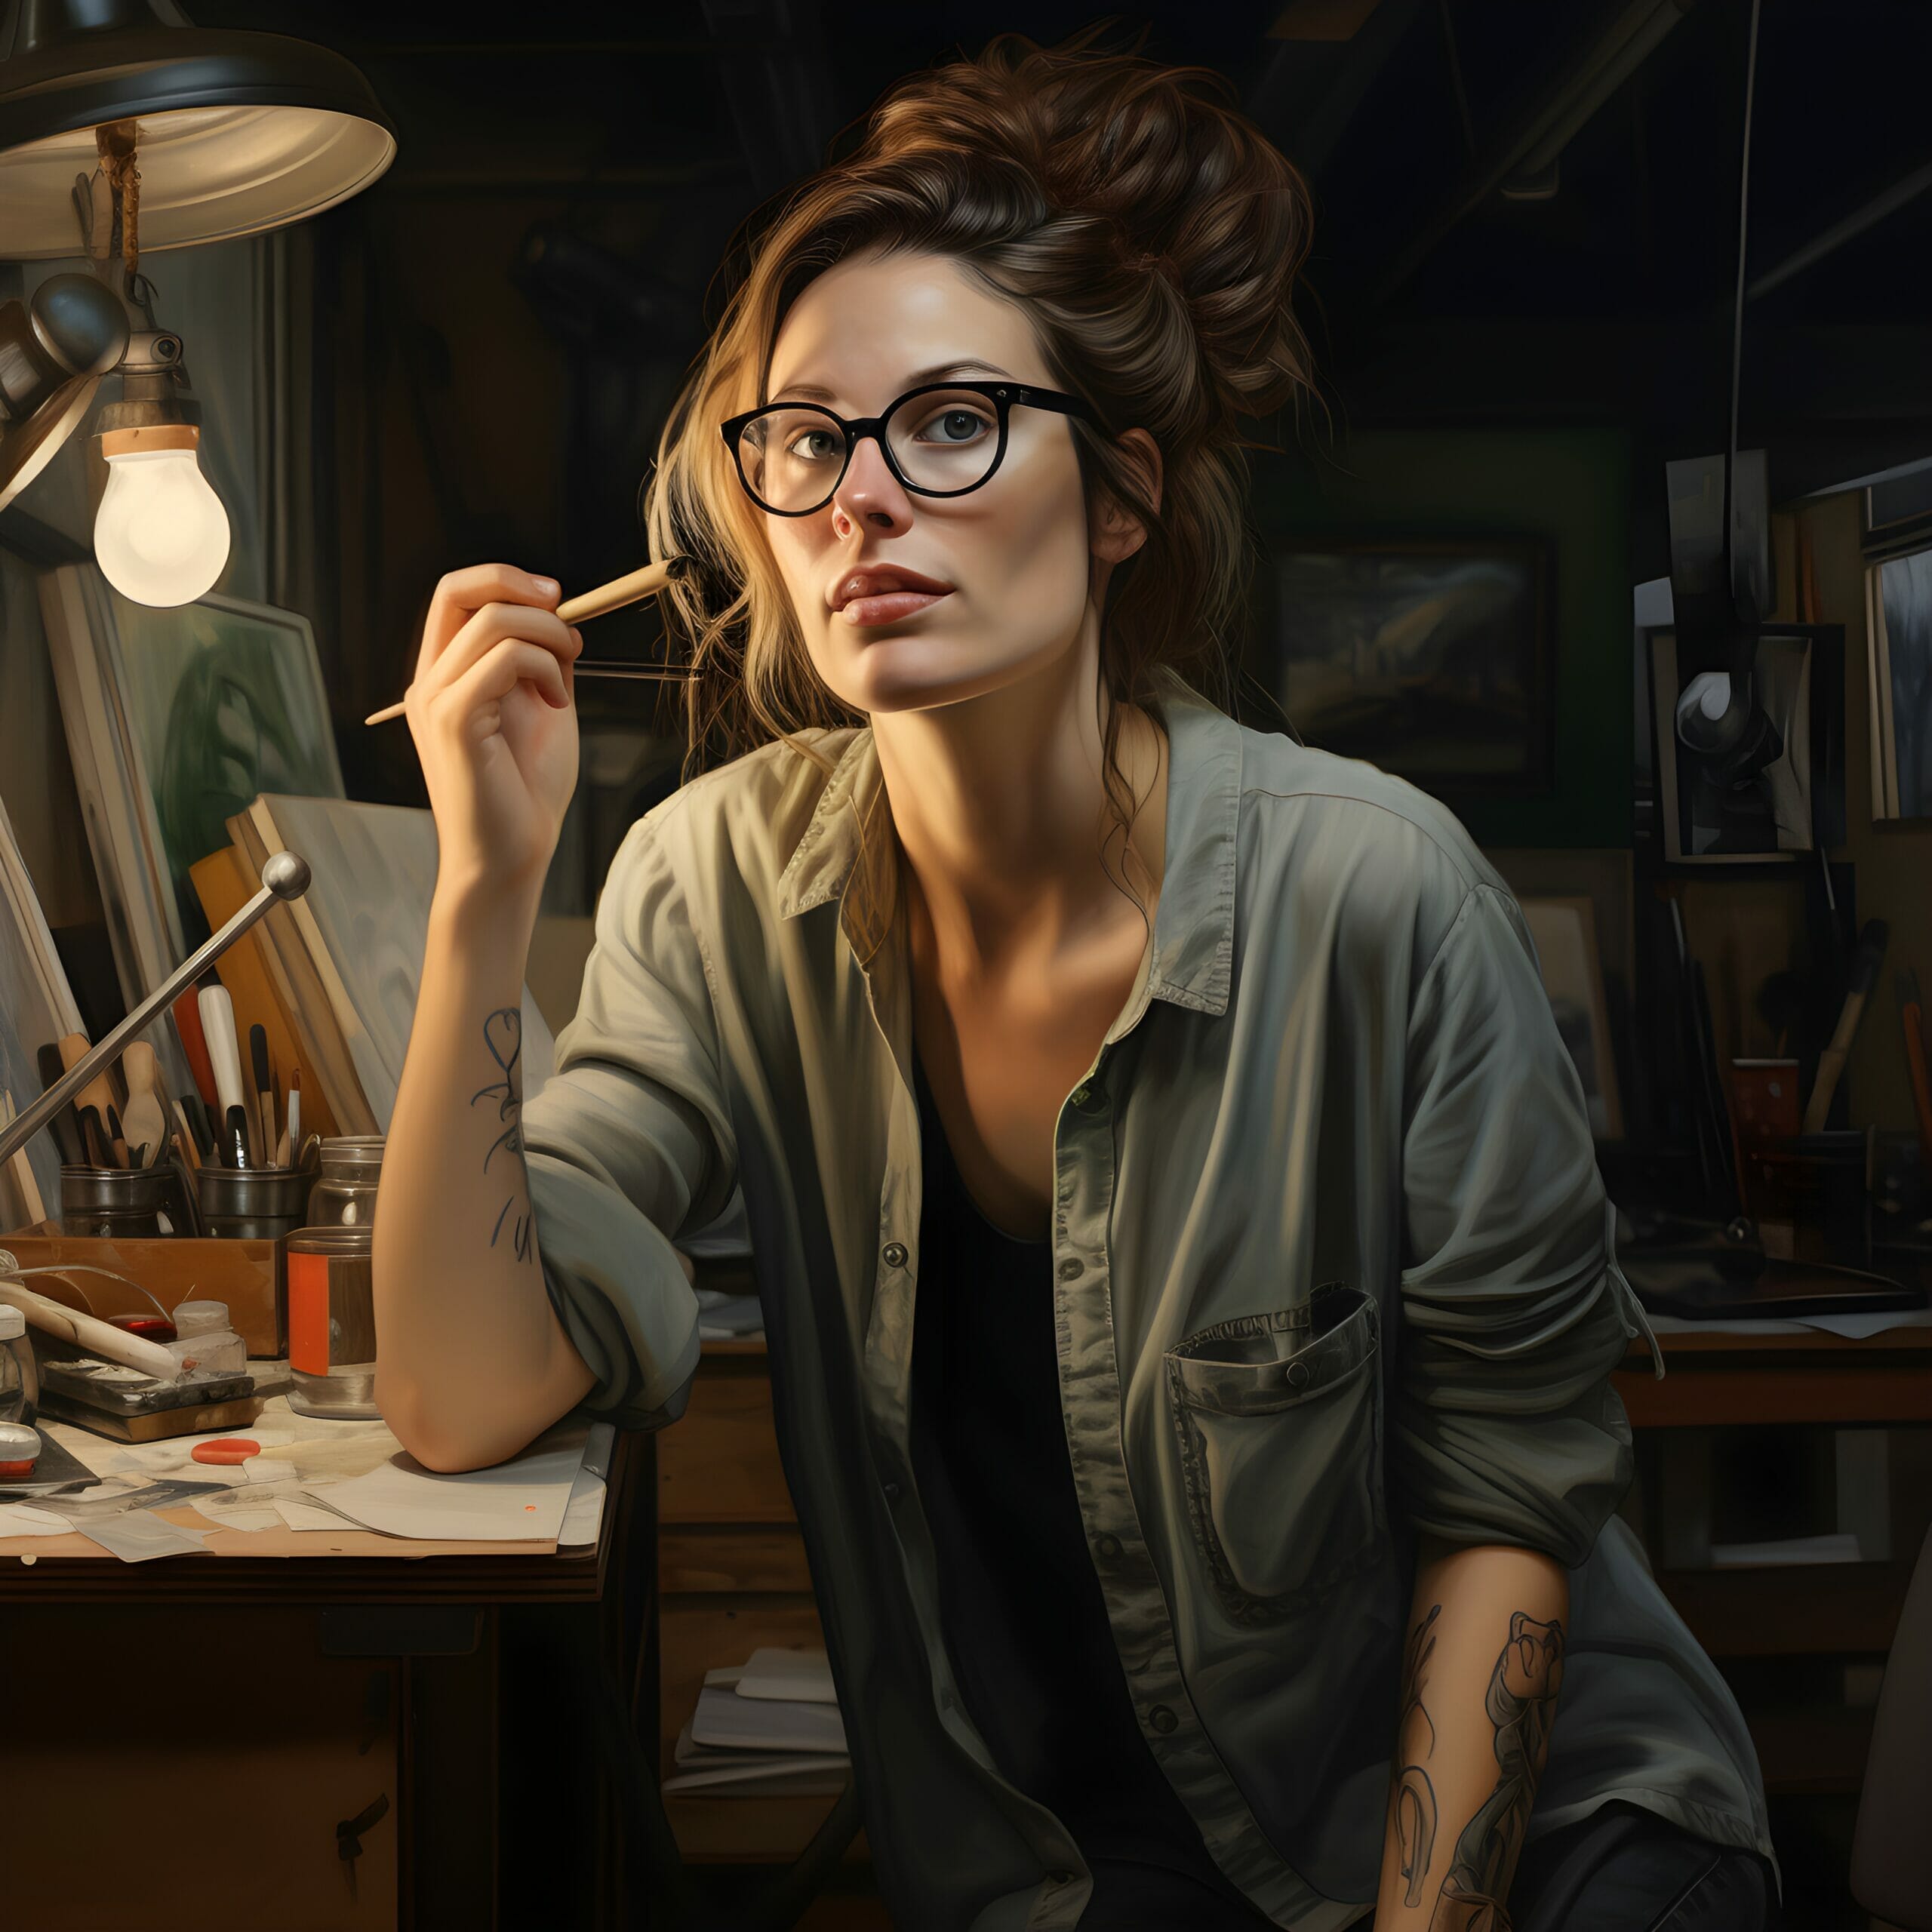 A woman, possibly an artist, wearing glasses and sitting at a desk.